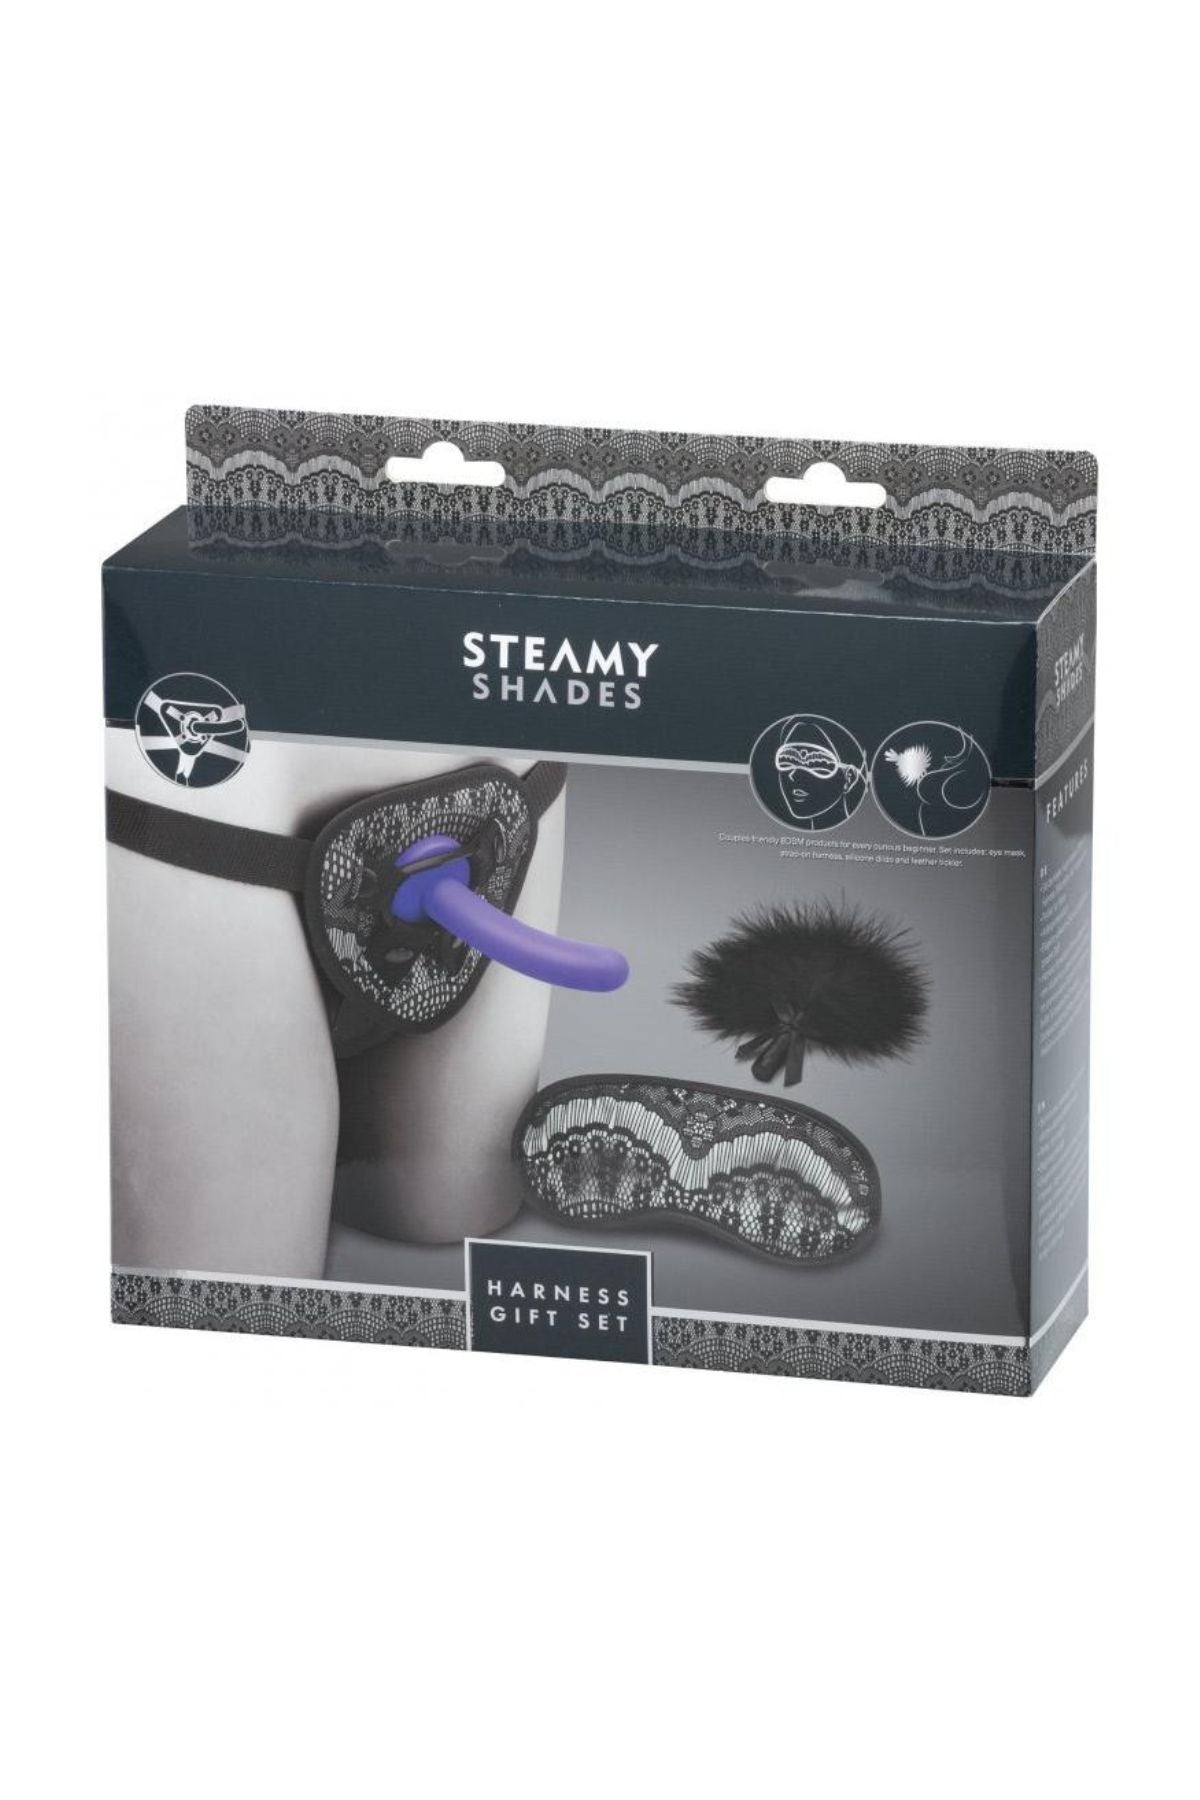 Steamy Shades Harness 4PC Gift Set